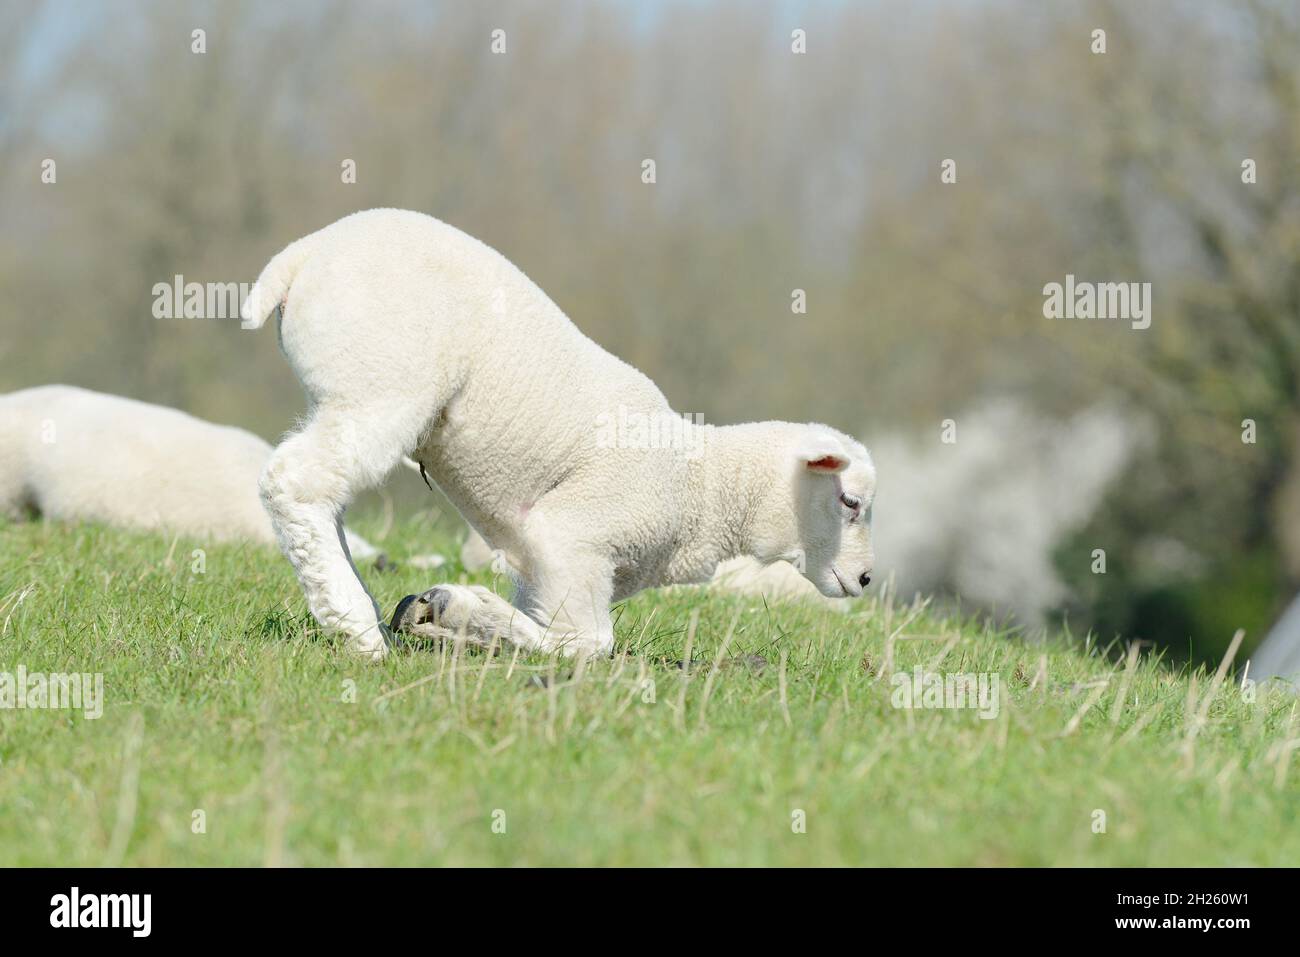 Sheep lamb standing on pasture and looking Stock Photo